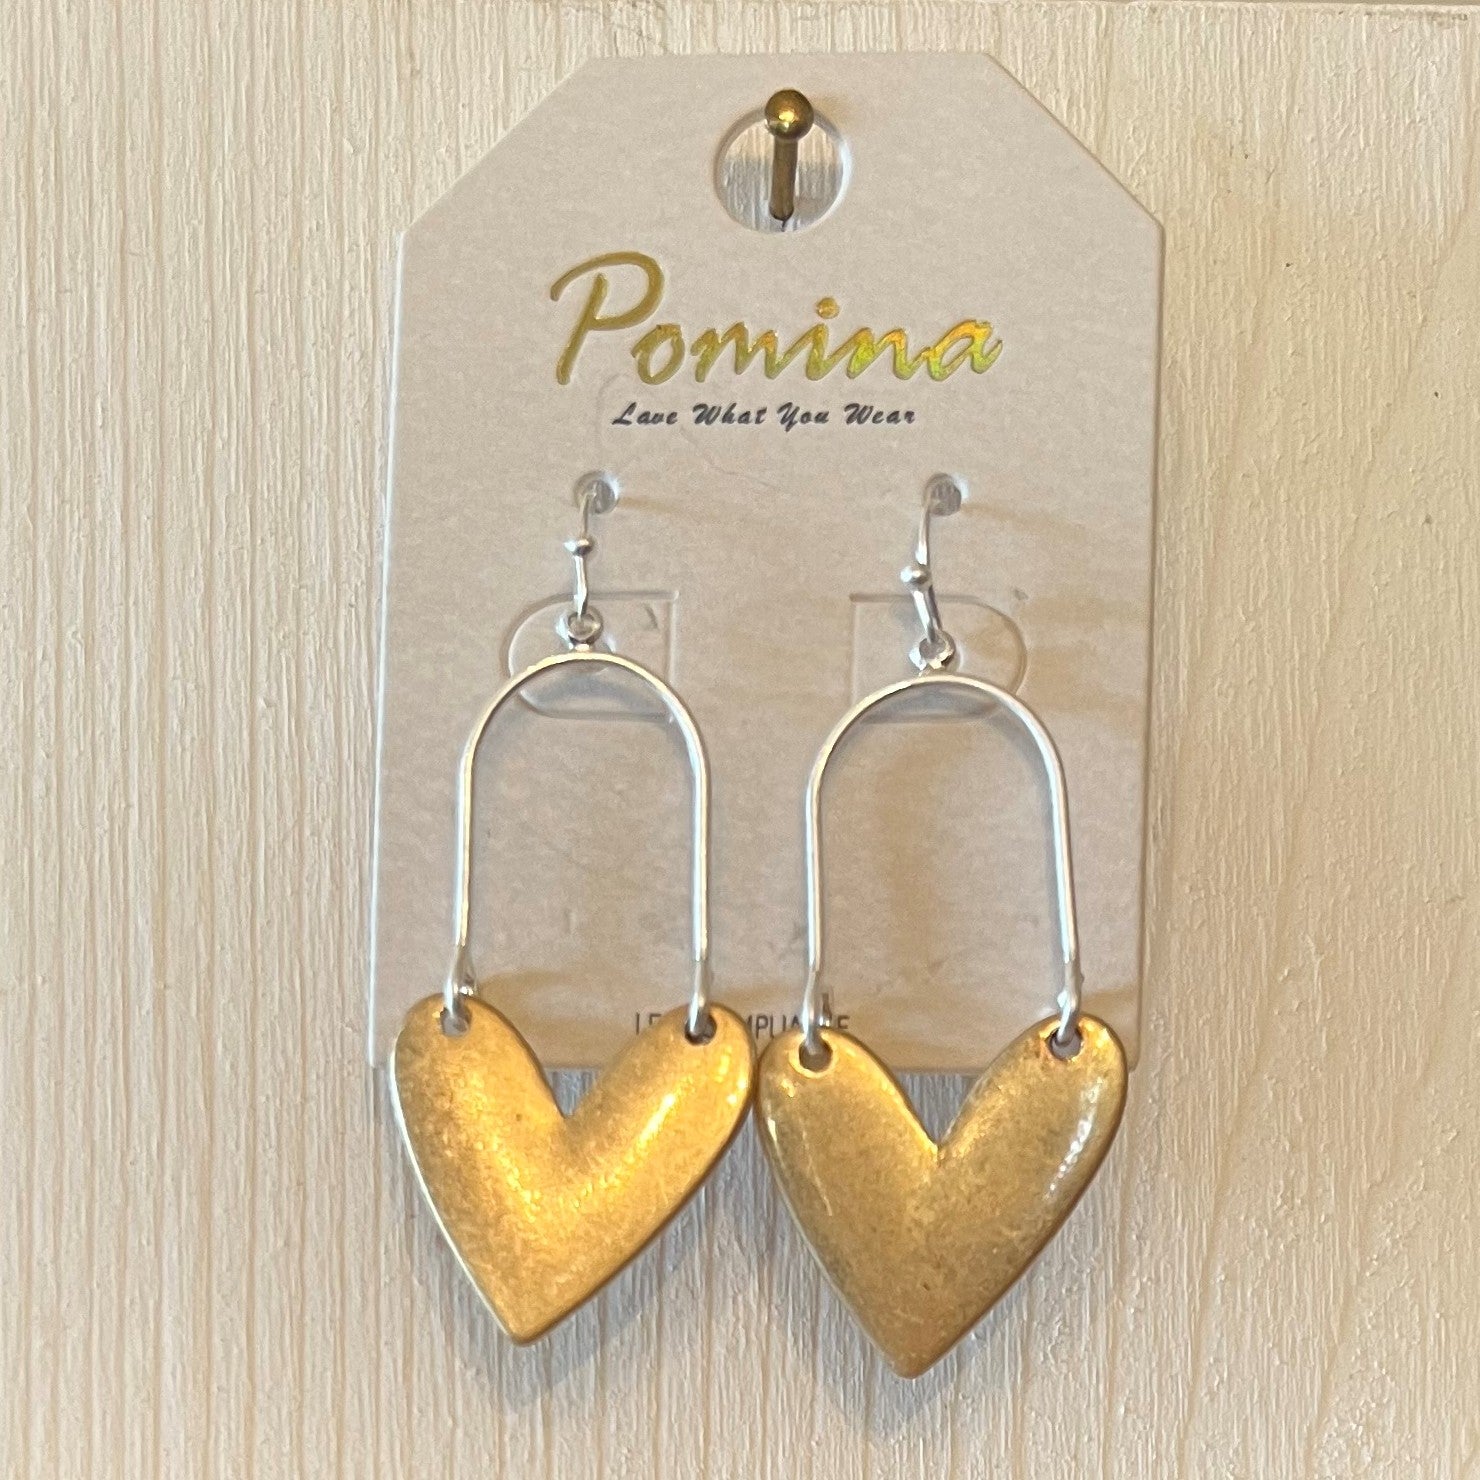 These matt earrings are just right for the Valentine season or anytime you want to show love! They are a unique combination of gold and silver. The heart is one color and the wire hardware is the other. The heart is more prominent so you can choose which color you want more of!